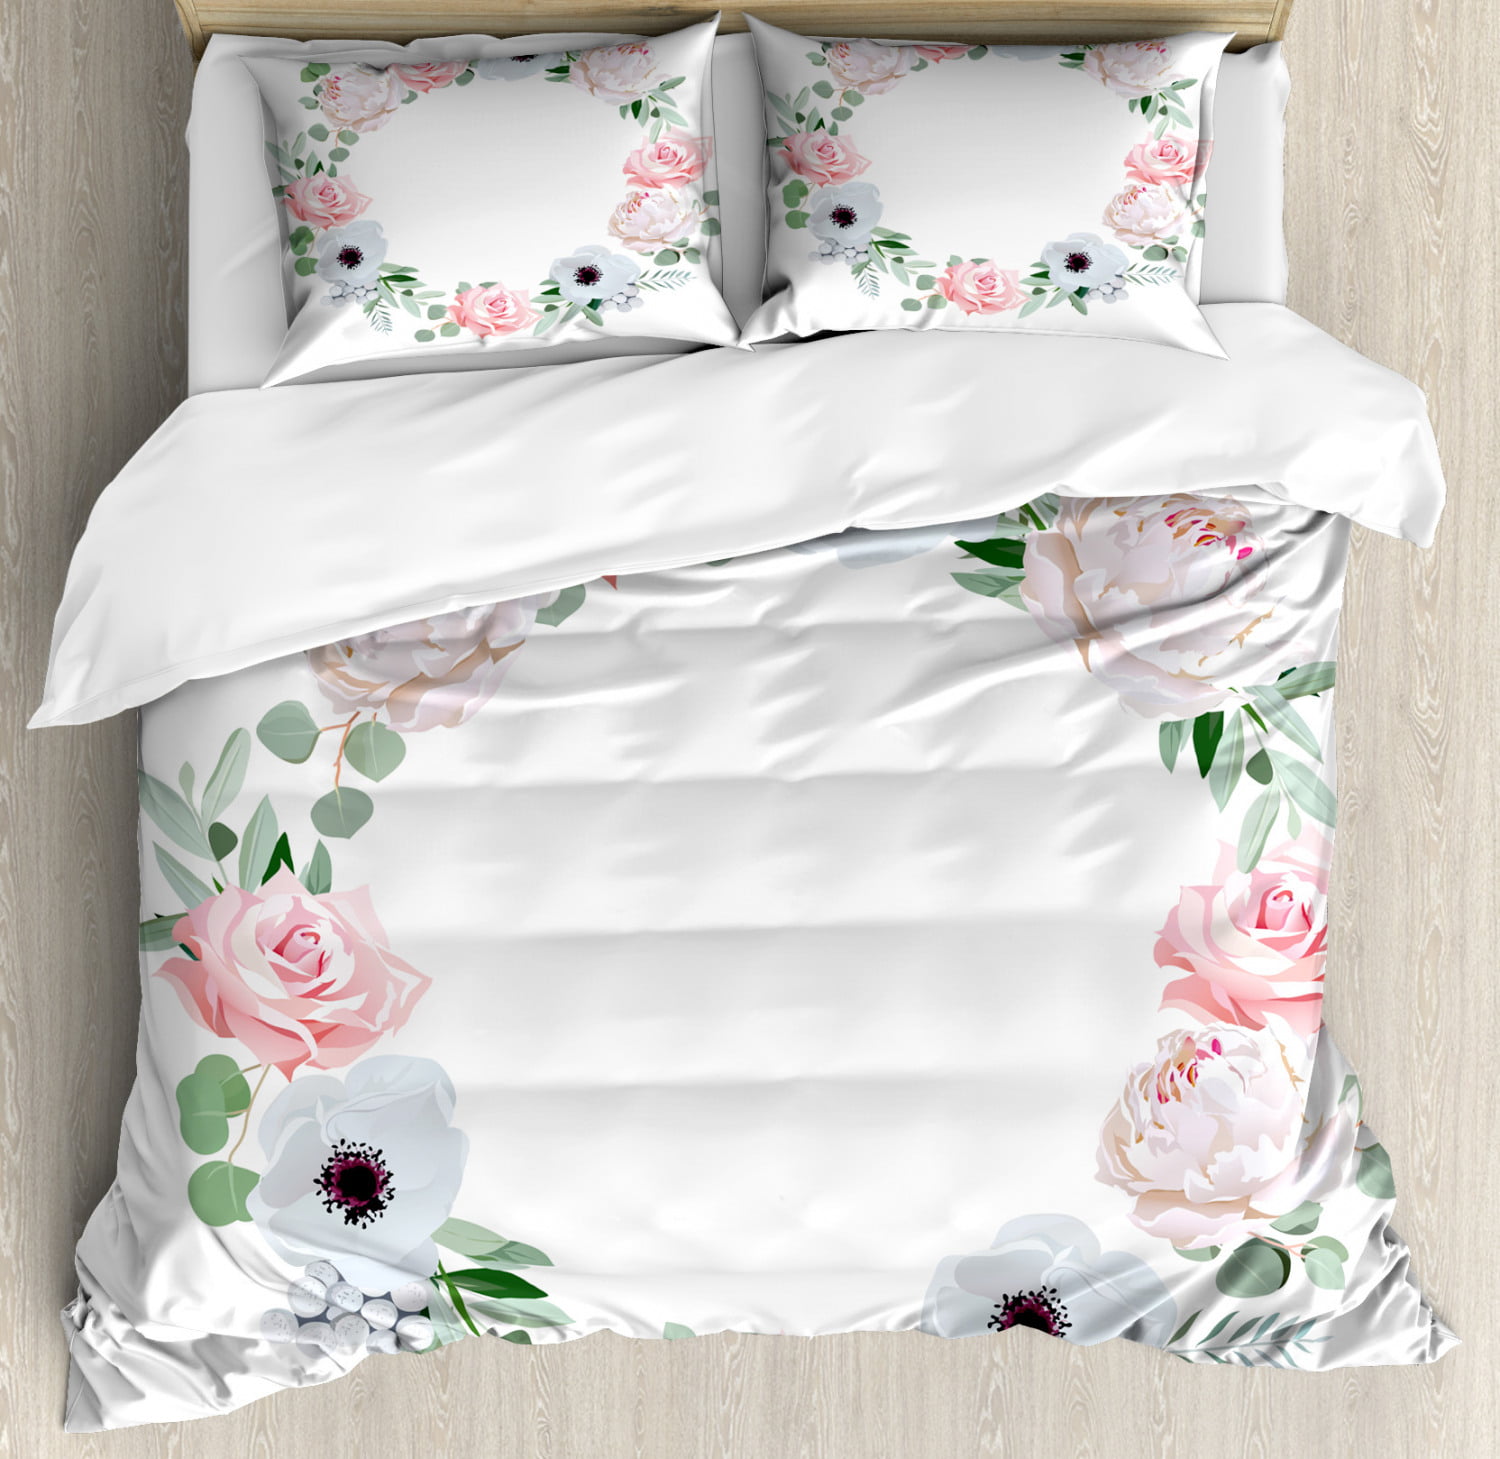 Anemone Flower Queen Size Duvet Cover Set, Delicate Peony Rose Brunia ...